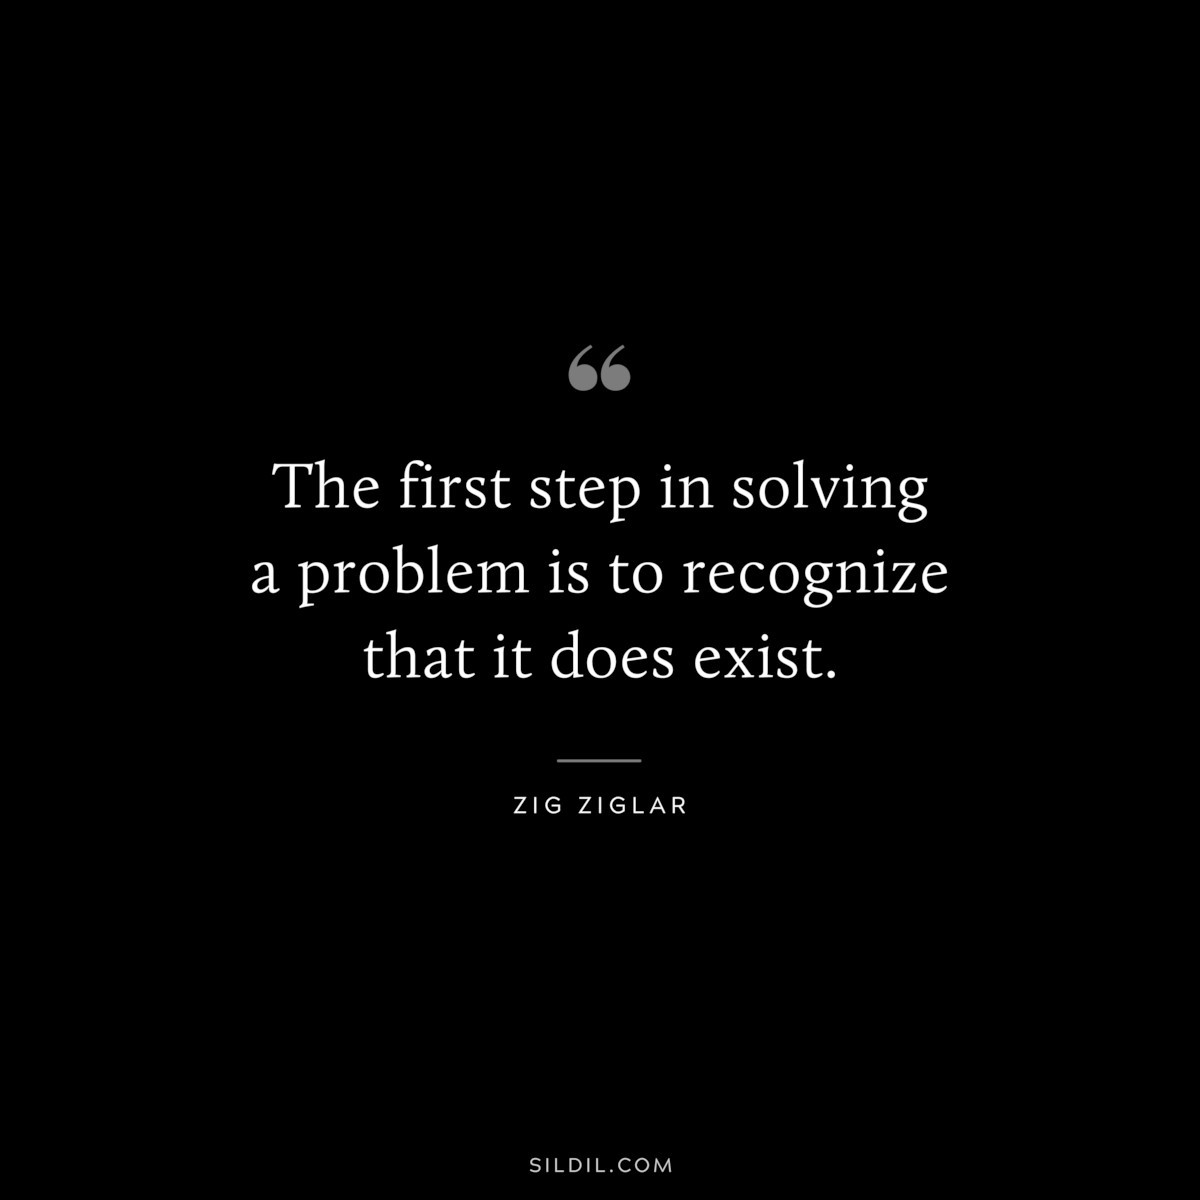 The first step in solving a problem is to recognize that it does exist. ― Zig Ziglar